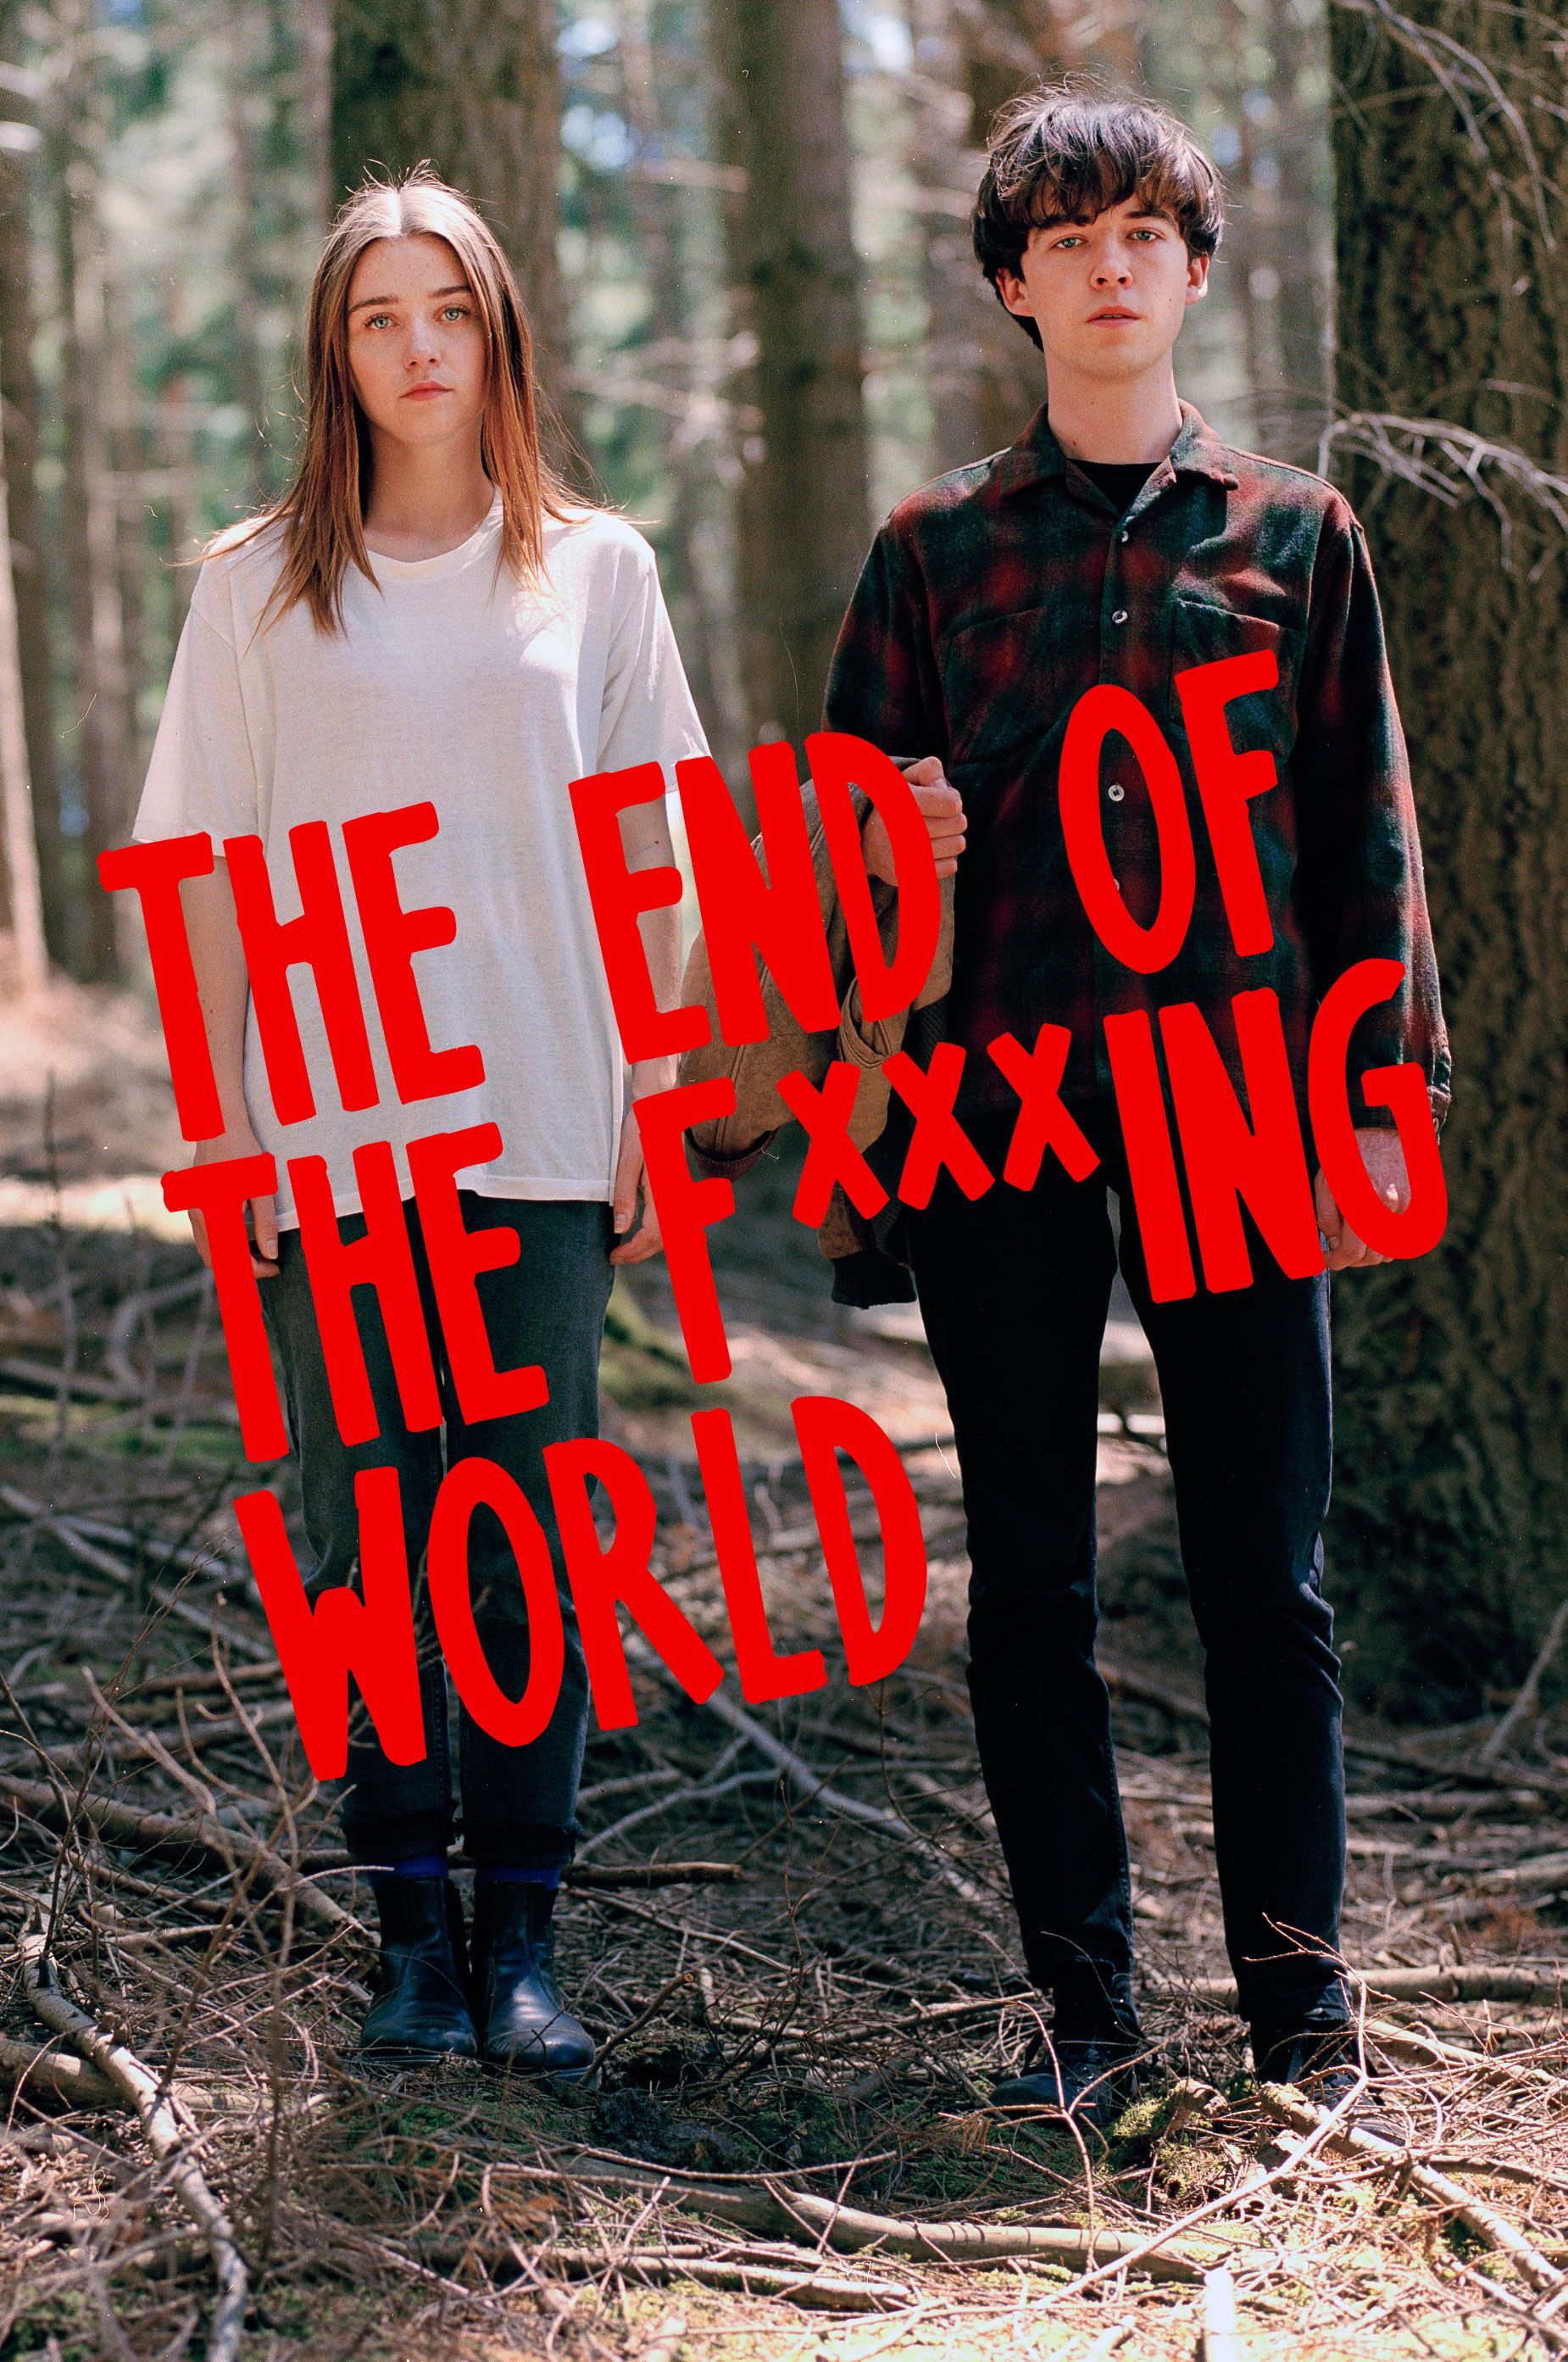 The End of the Fxxxing World. TV Shows. Netflix, TVs